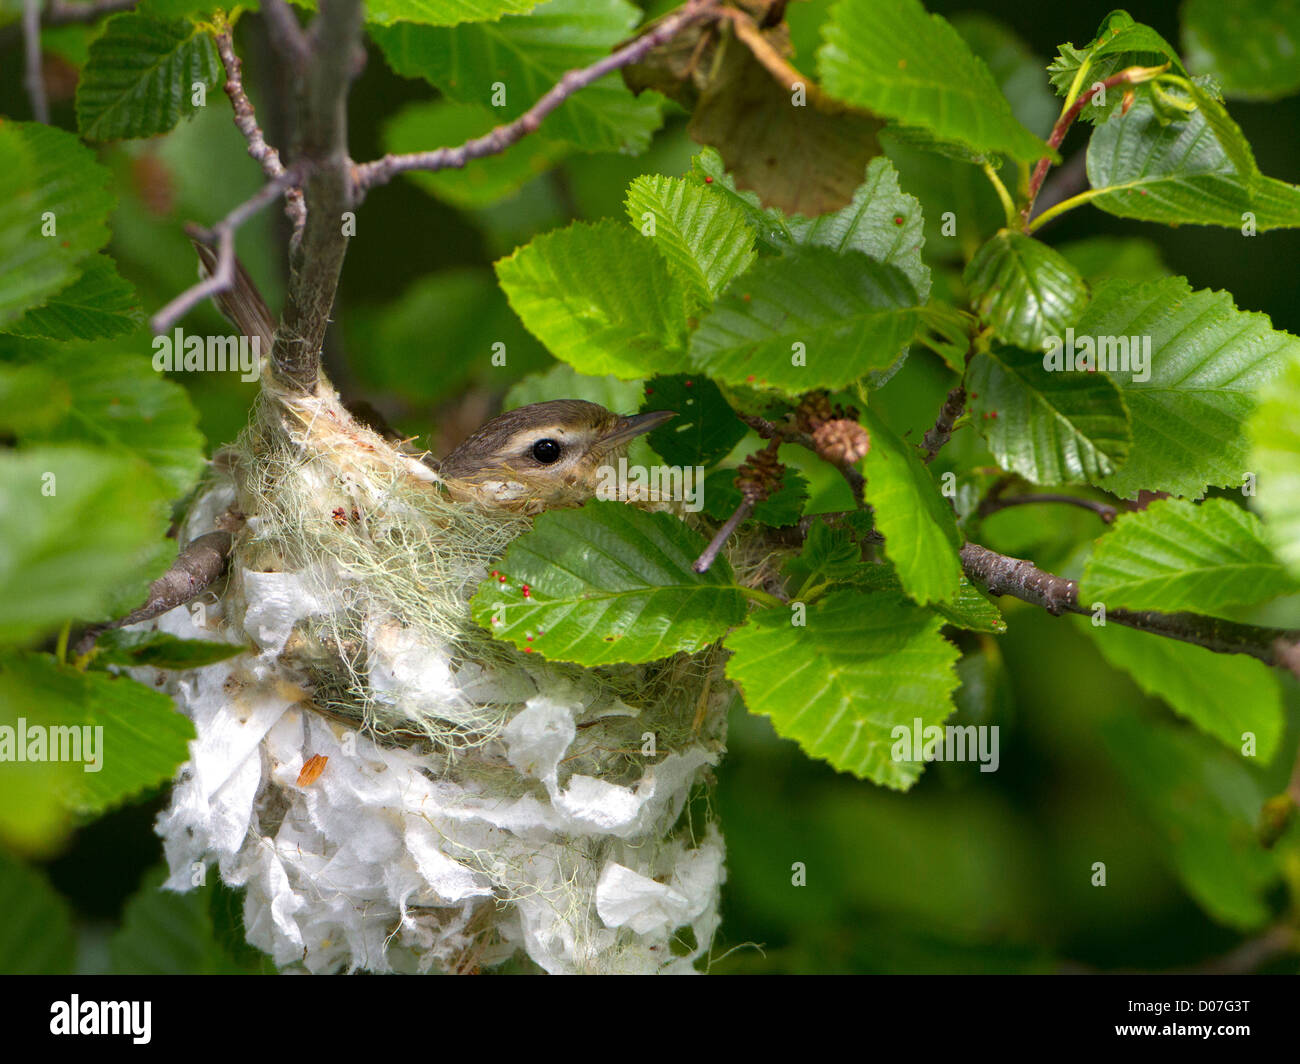 USA, Washington State. A Warbling Vireo (Vireo gilvus) on a nest made with toilet paper in an alder branch fork Stock Photo